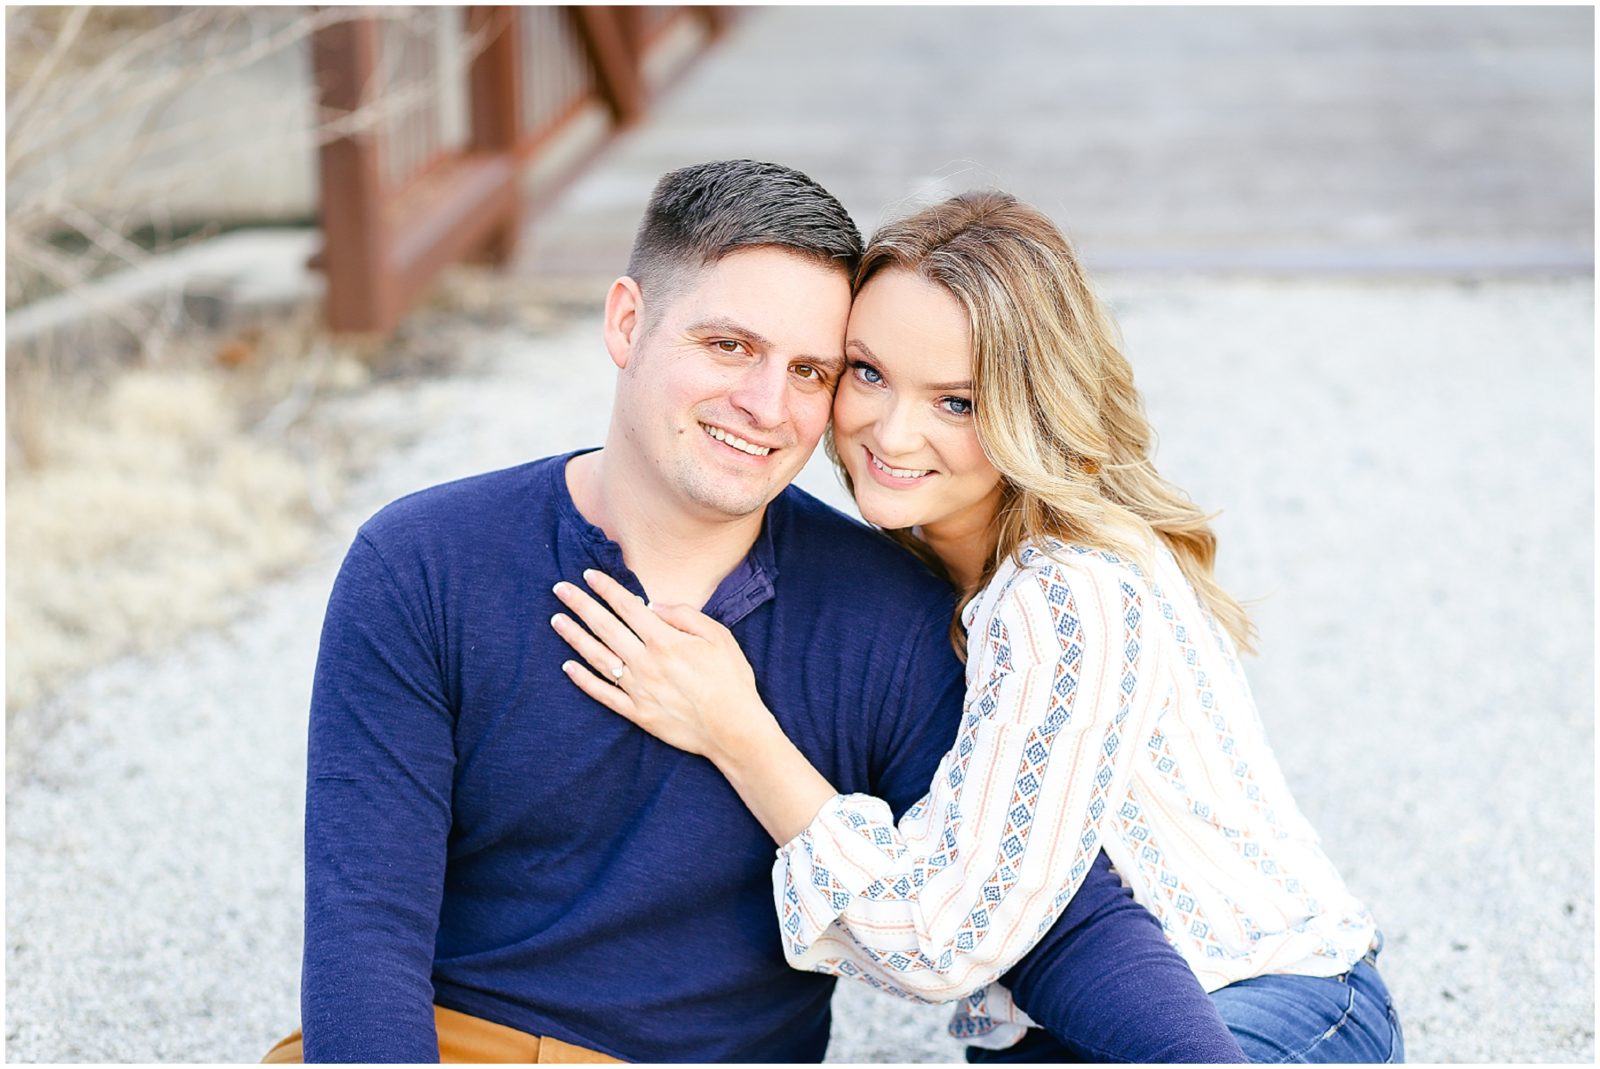 adorable couple for their engagement session in overland park kansas city